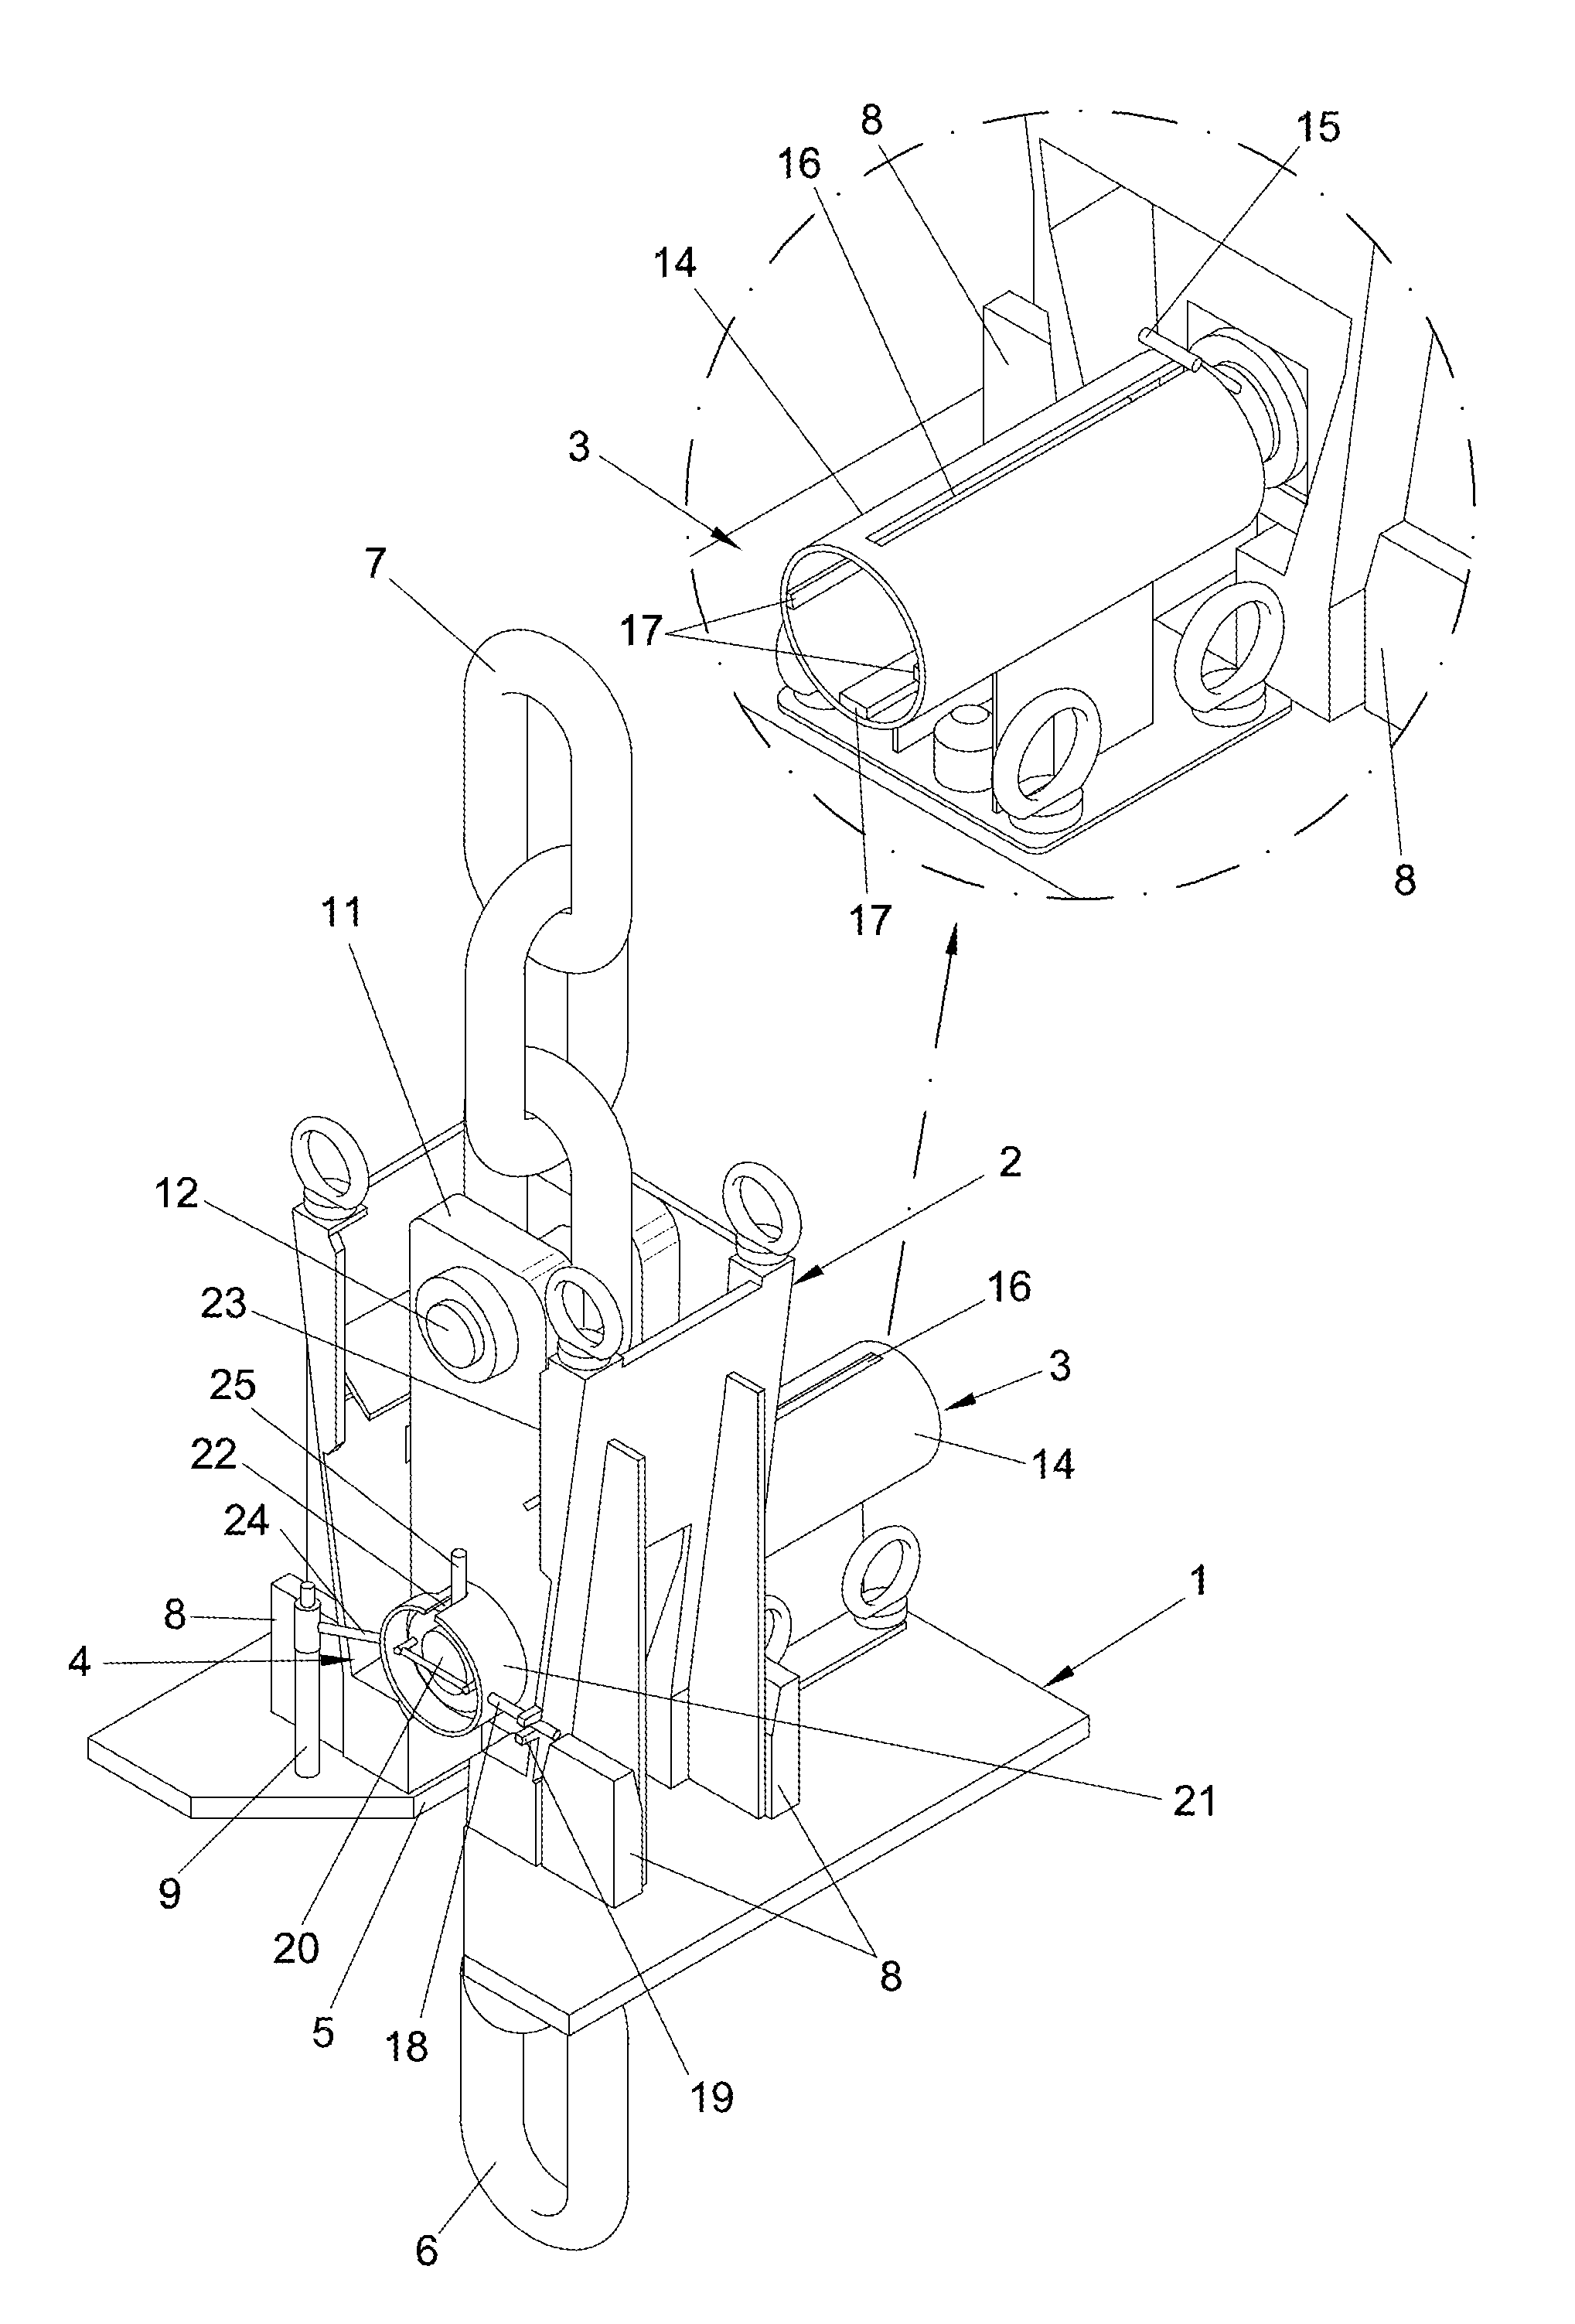 Apparatus for vertically linking two sections of chain